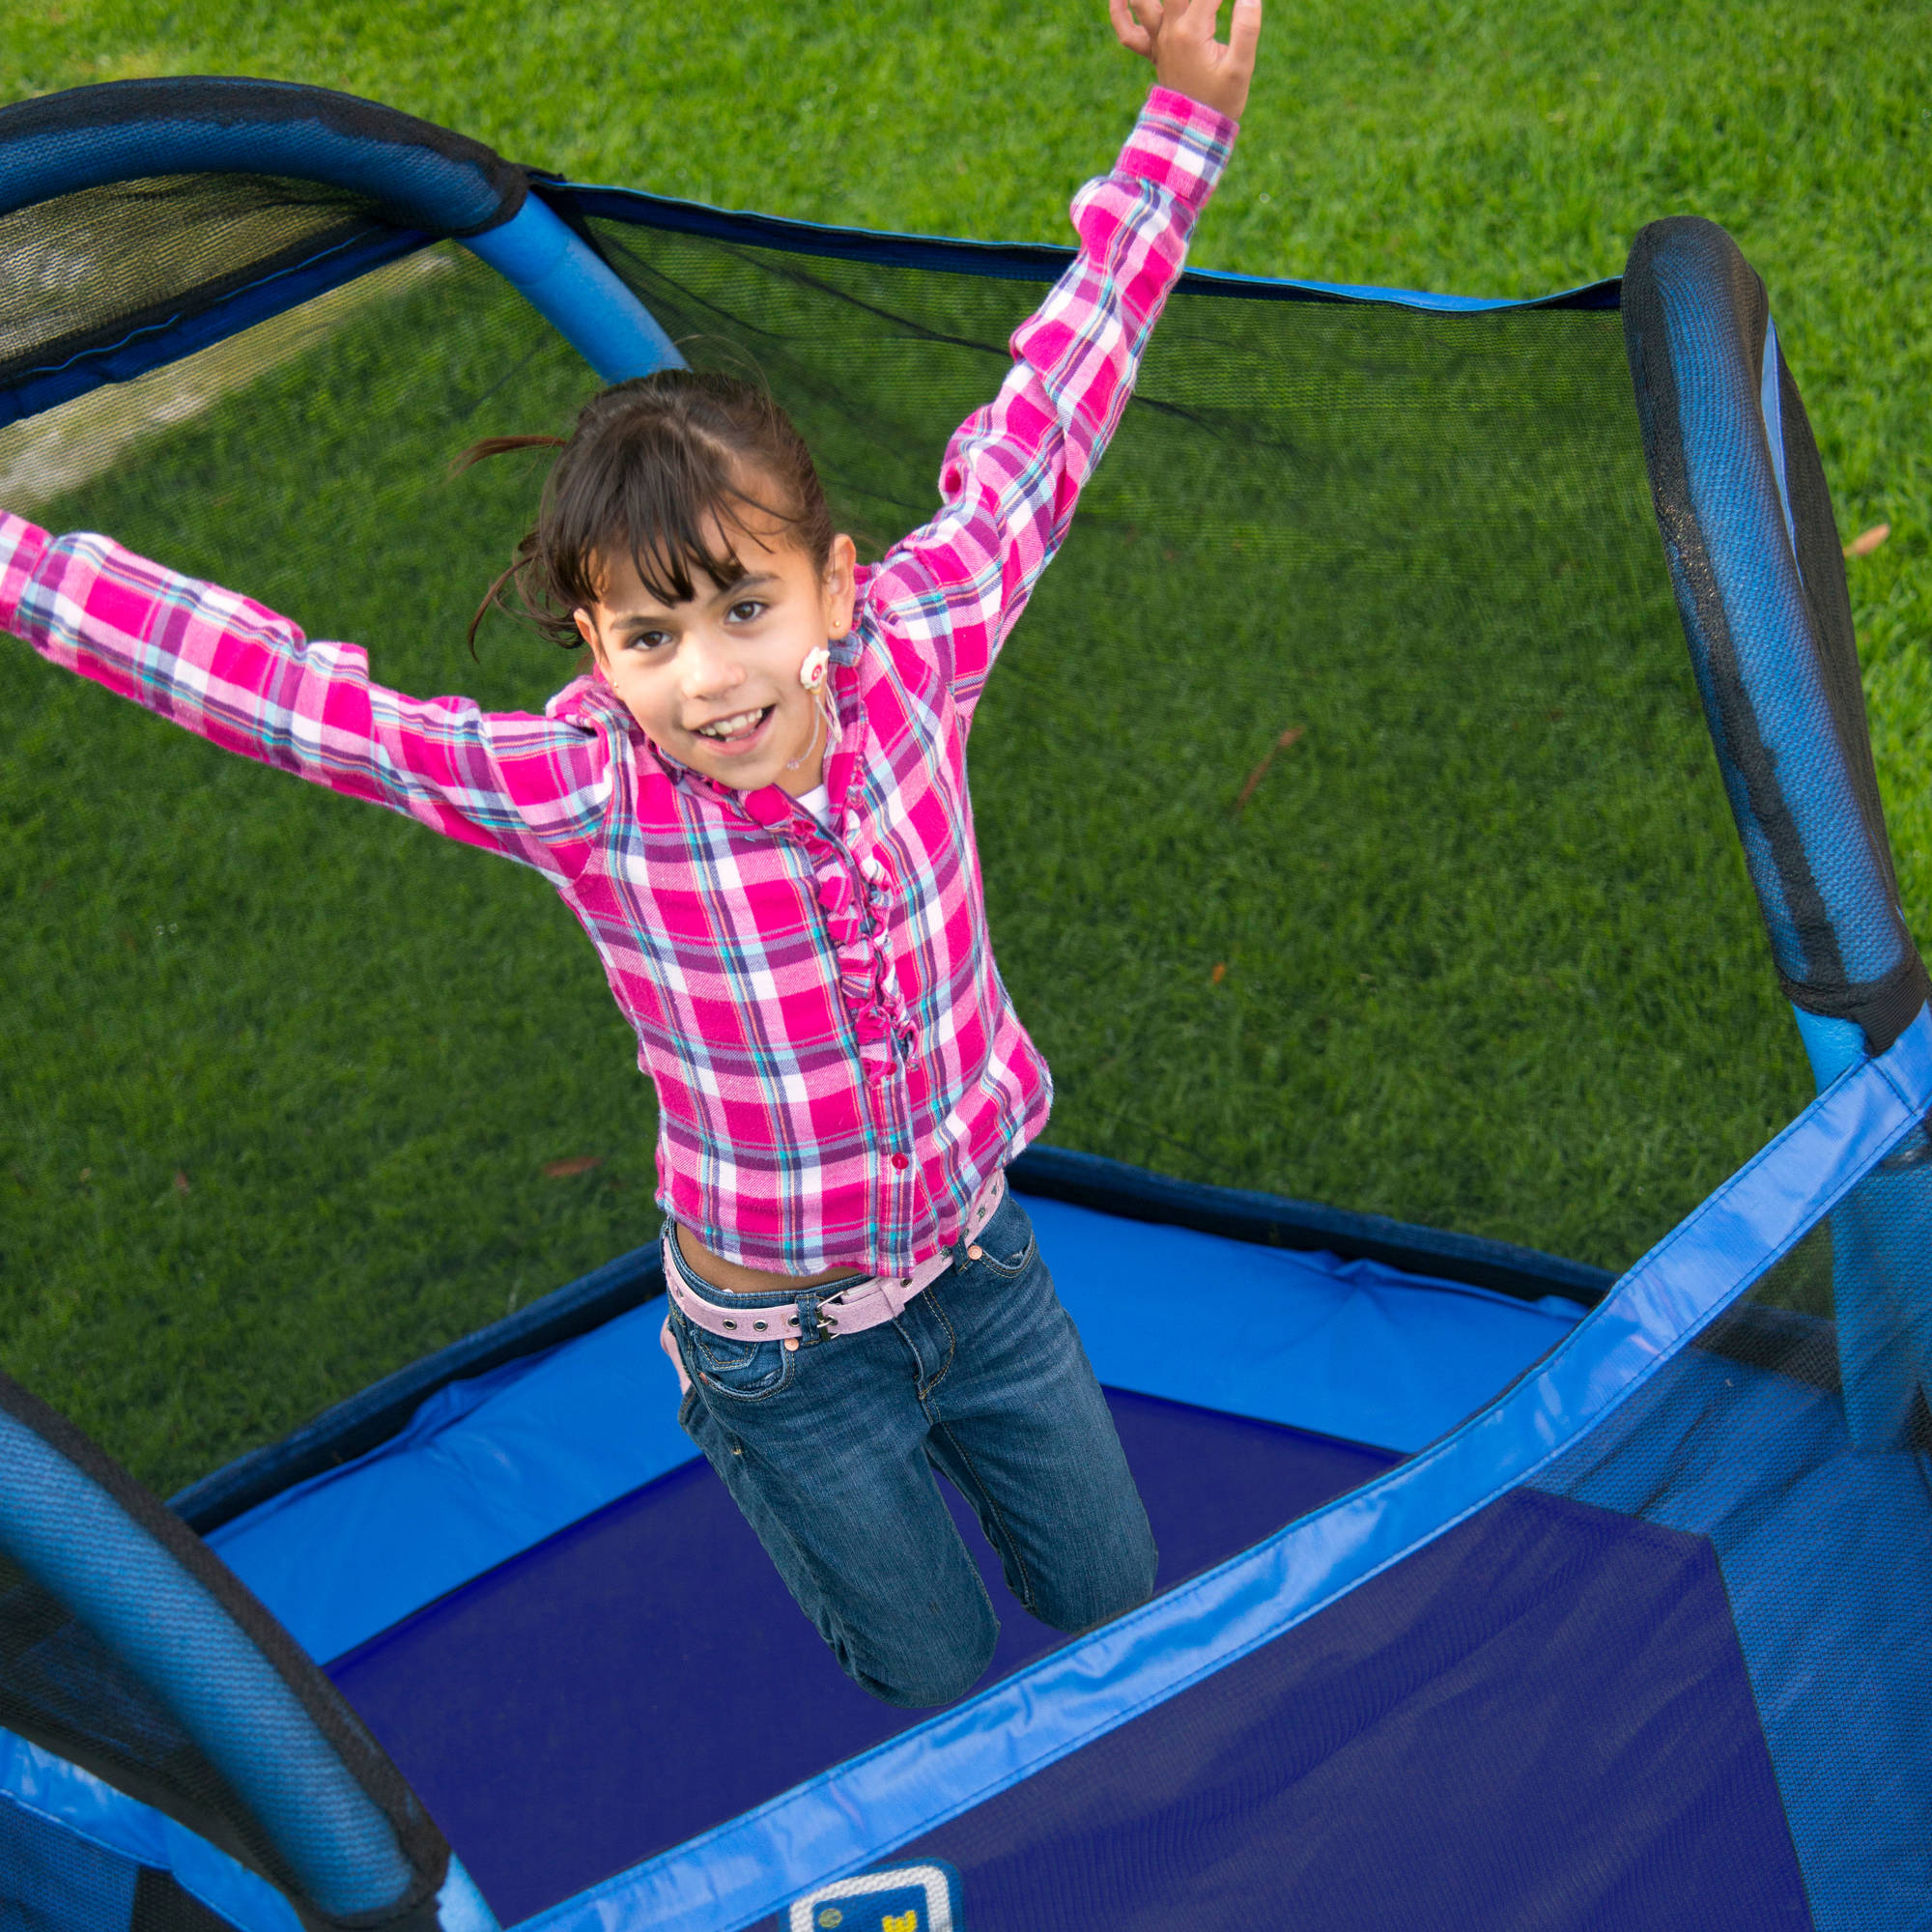 Bounce Pro My First Jump 7' Trampoline and Swing, Blue/Green - image 10 of 14